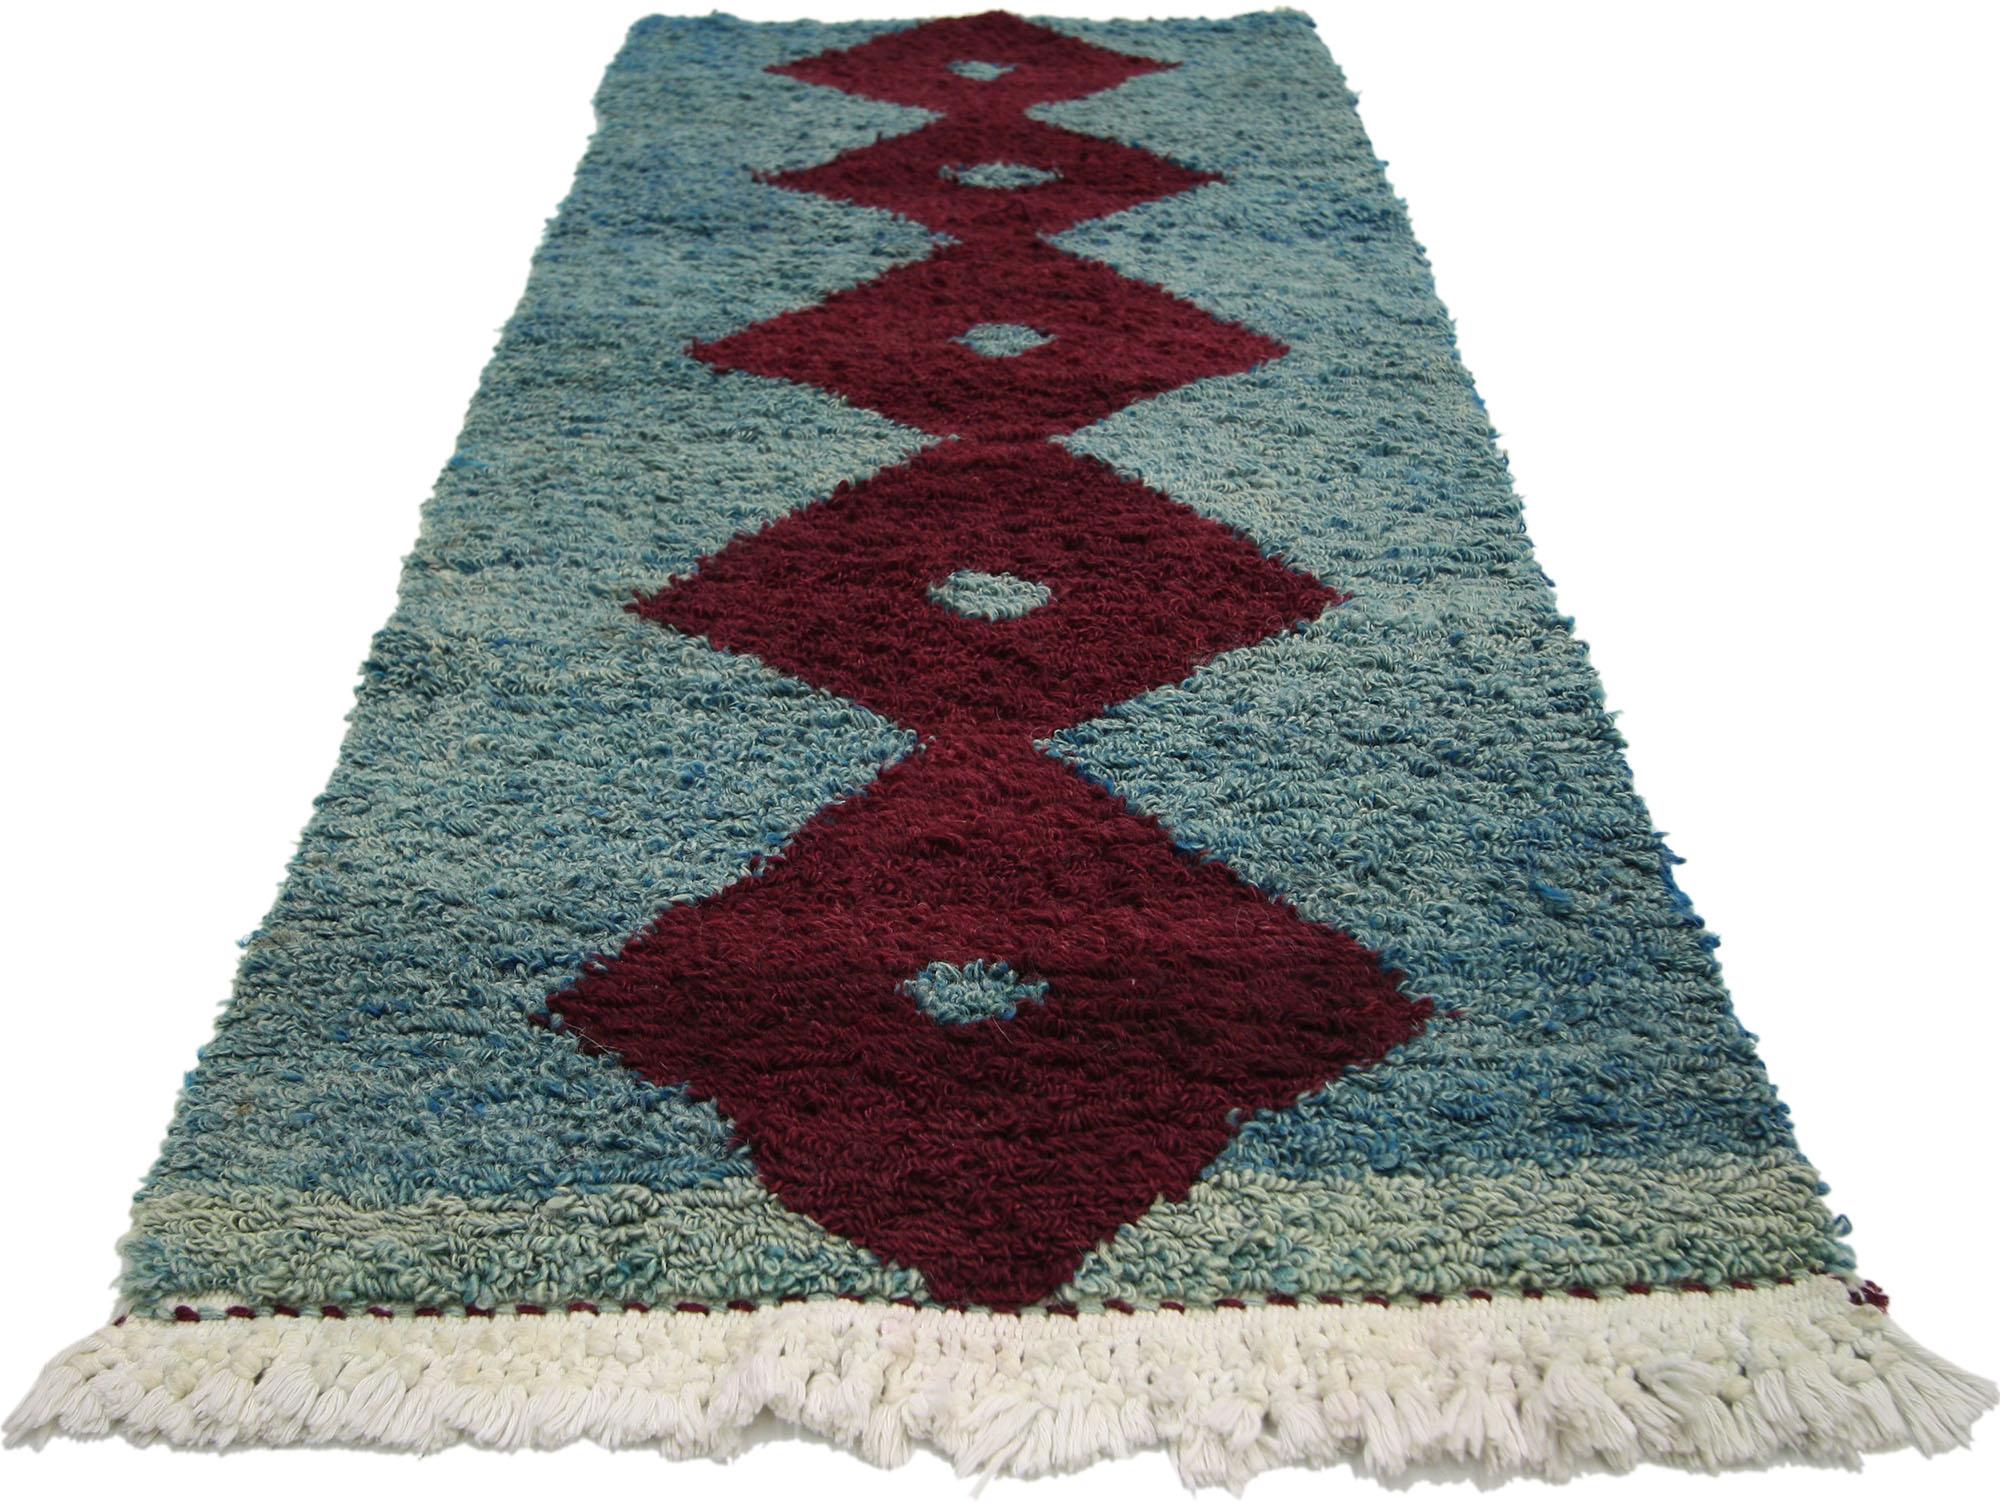 52286, vintage Turkish Ceki Tulu Accent rug - Tribal Shag wall hanging. This vintage Turkish Tulu Accent rug features five stacked diamond lozenge motifs rendered in deep burgundy maroon in a turquoise and aquamarine sea of abrash. This Tulu rug can